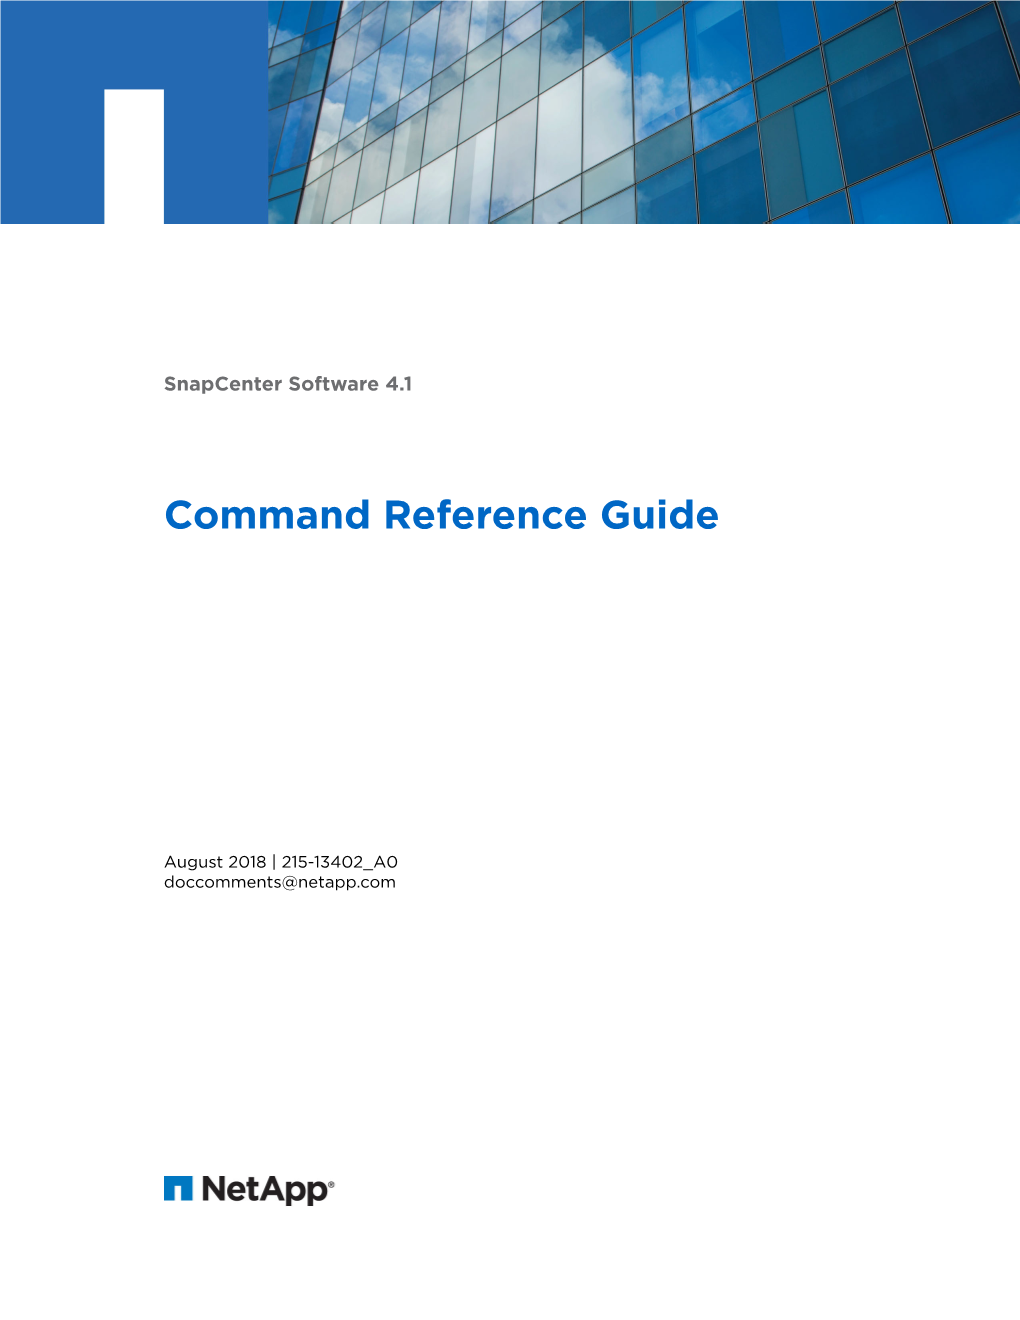 Snapcenter Software 4.1 Command Reference Guide